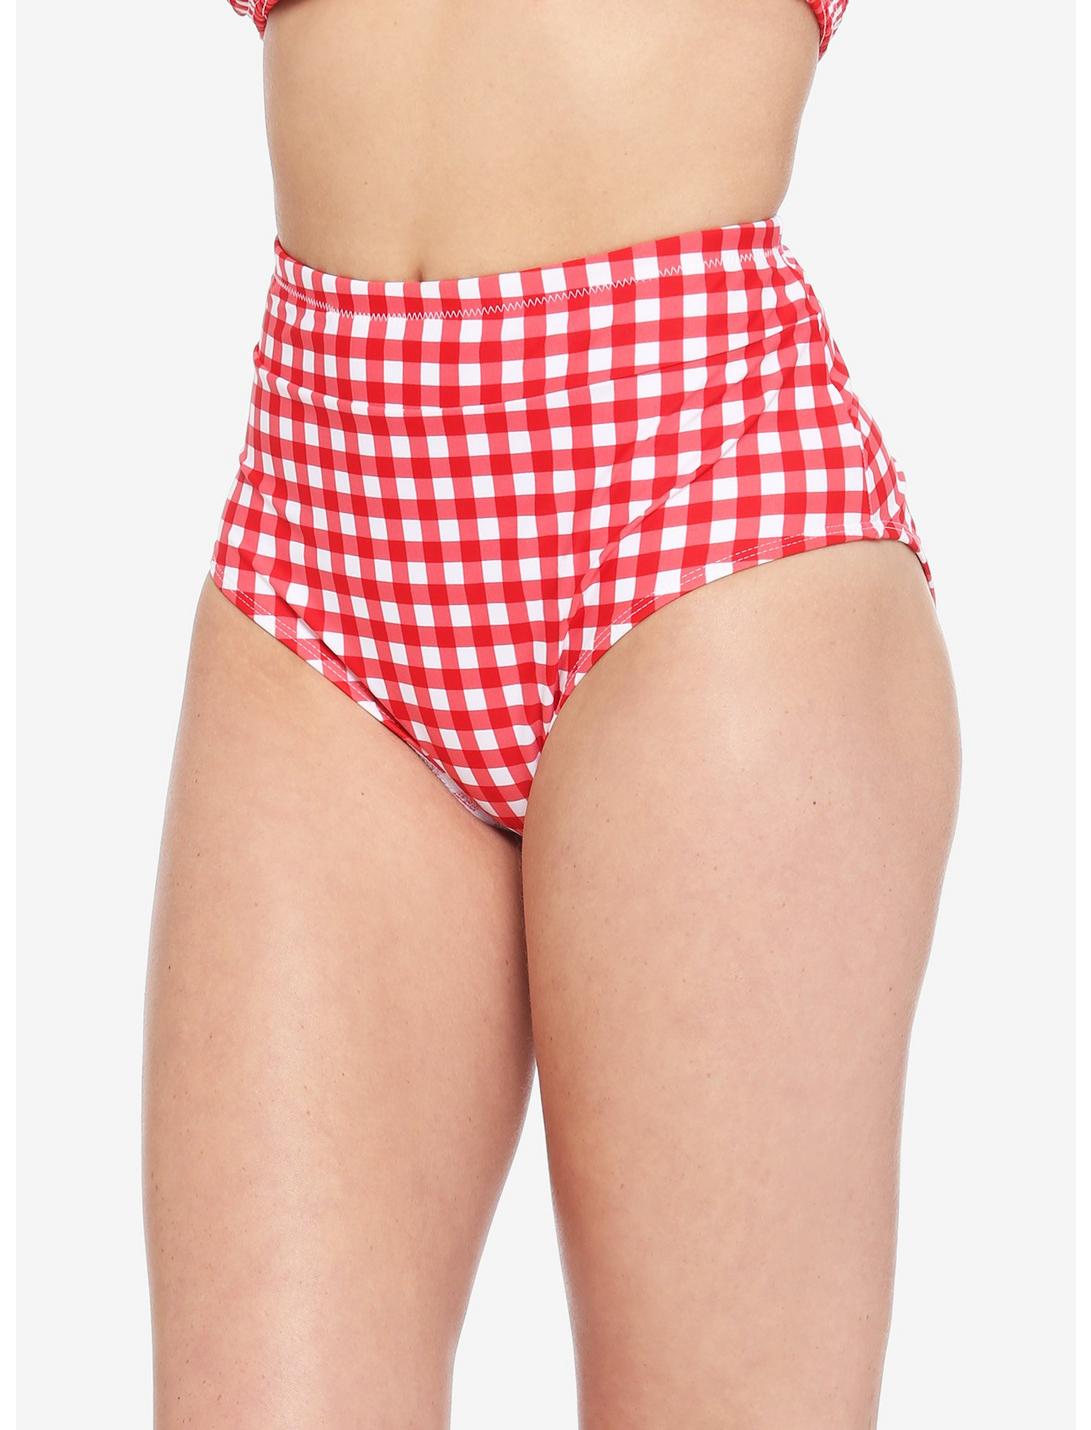 Red & White Gingham High-Waisted Swim Bottoms, RED, hi-res